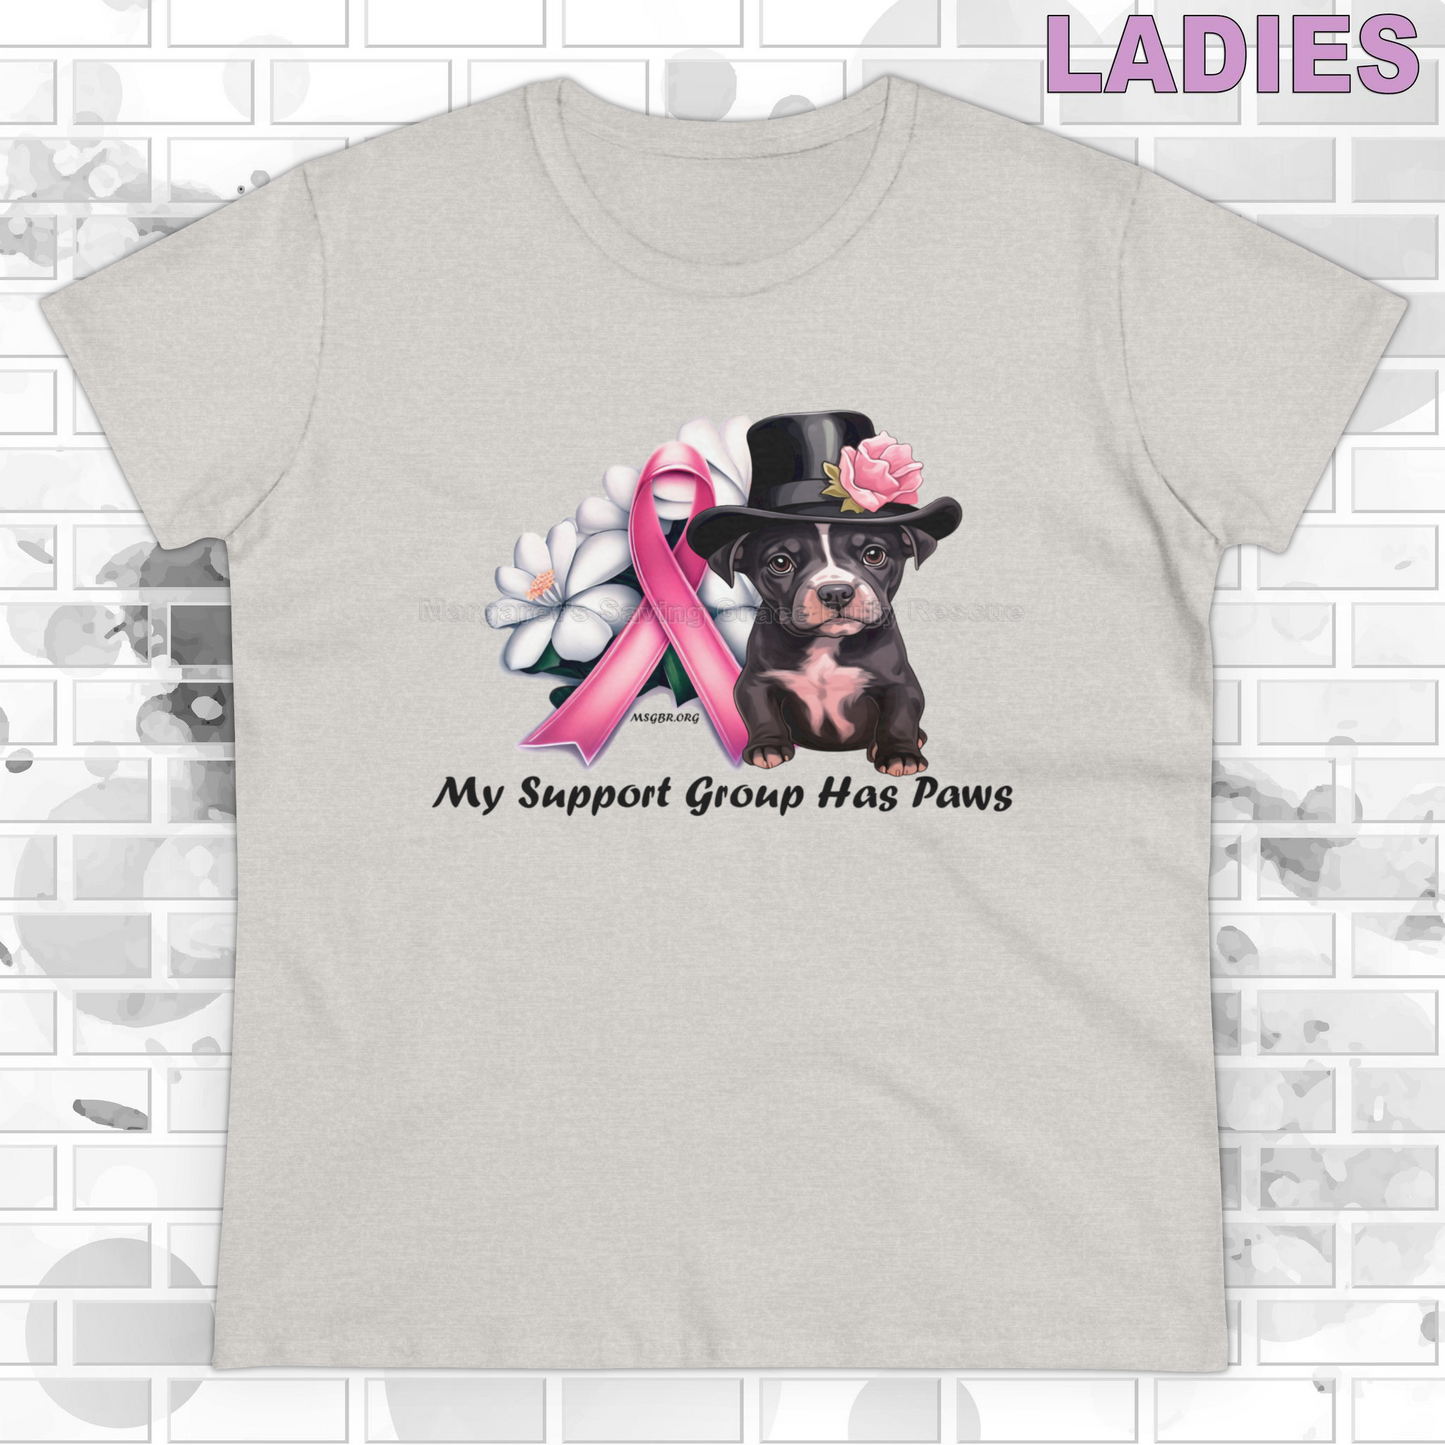 MSGBR Bully Rescue Pitbull Dog Breed Breast Cancer Support Group Has Paws T Shirt